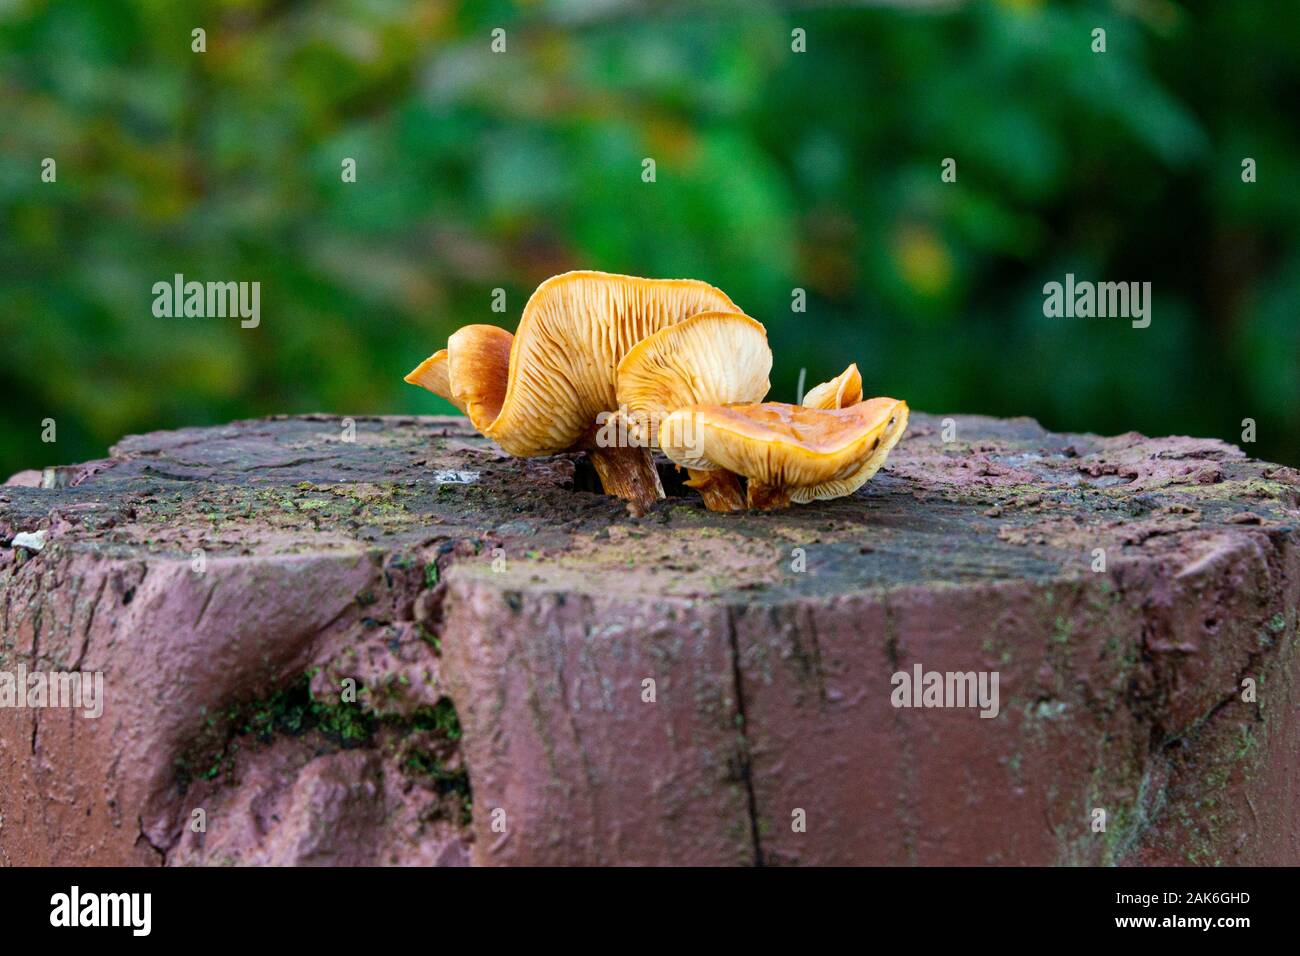 Fungi growing on a fence post Stock Photo